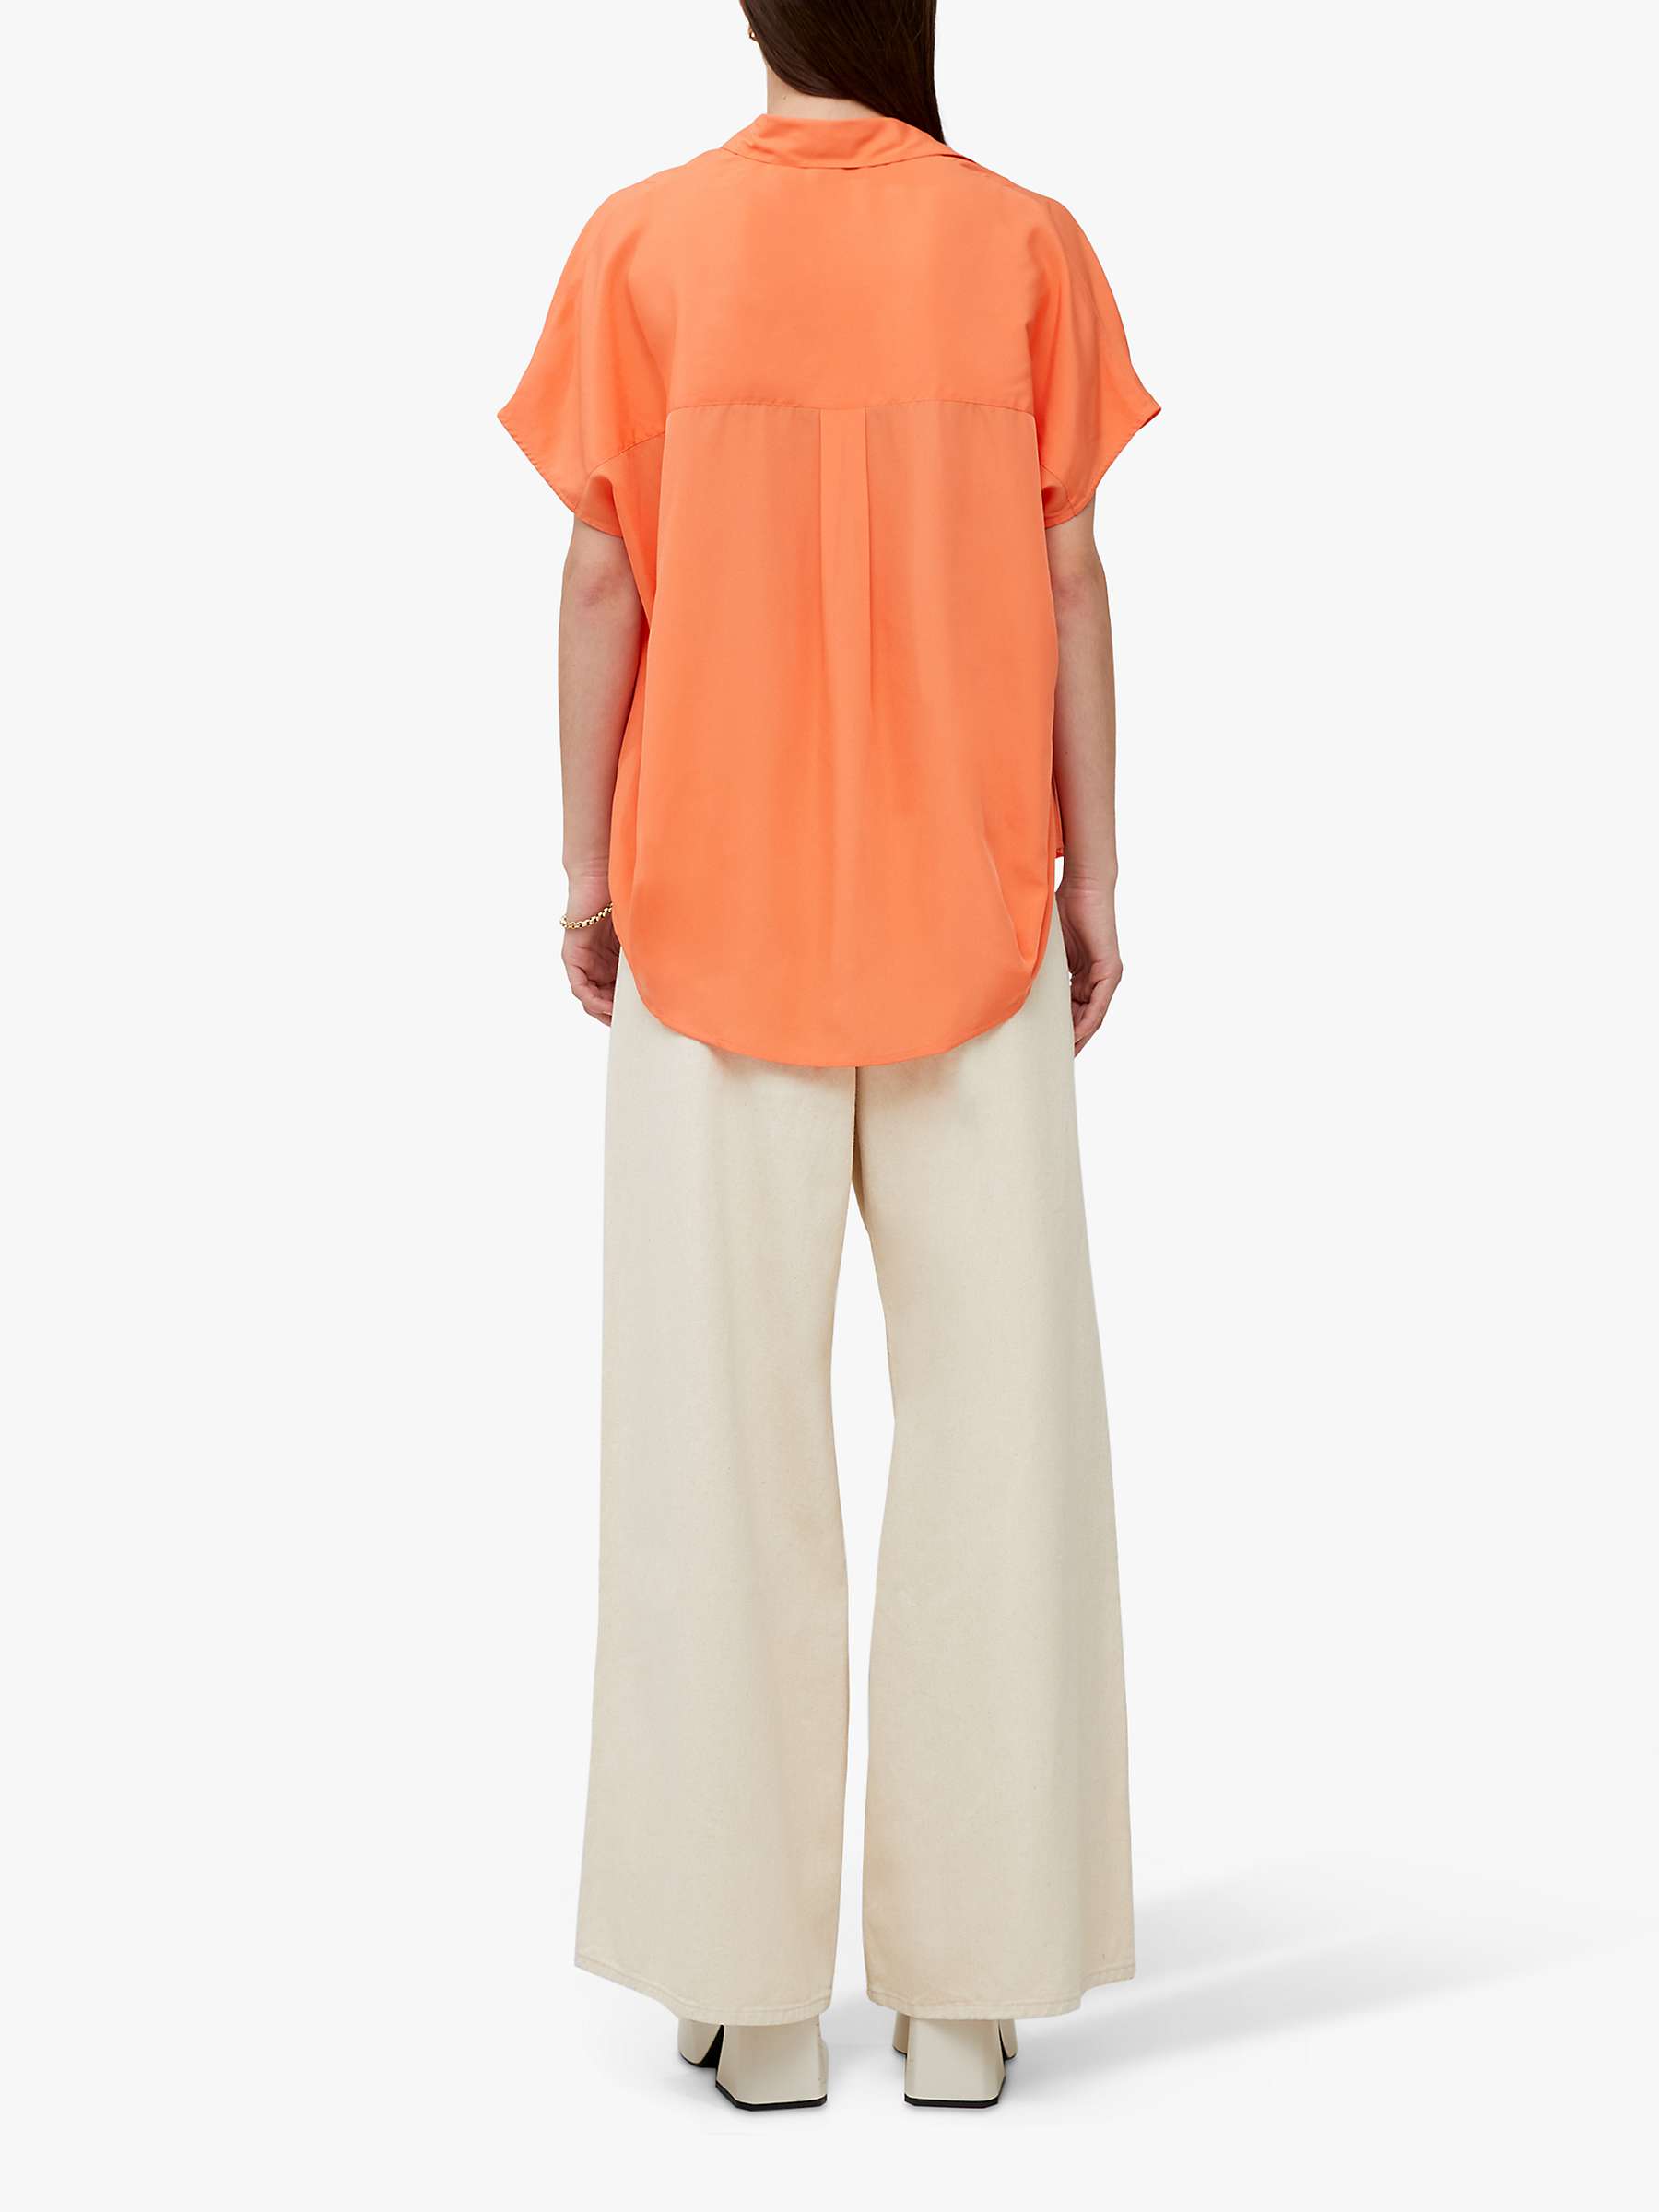 Buy French Connection Short Sleeve Light Crepe Blouse Online at johnlewis.com